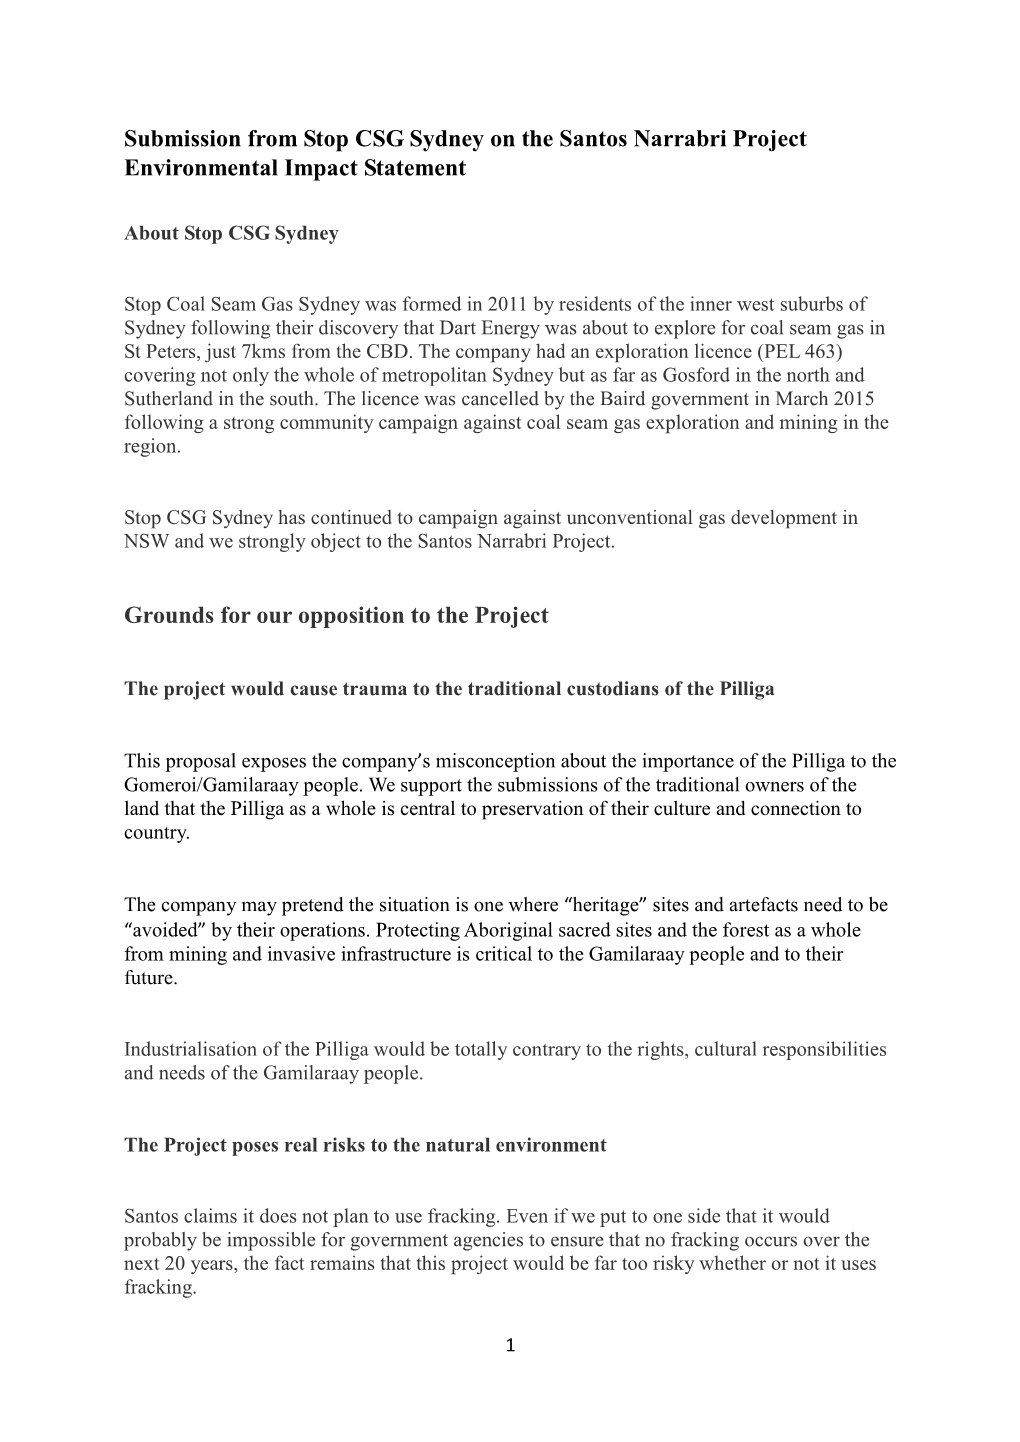 Submission from Stop CSG Sydney on the Santos Narrabri Project Environmental Impact Statement